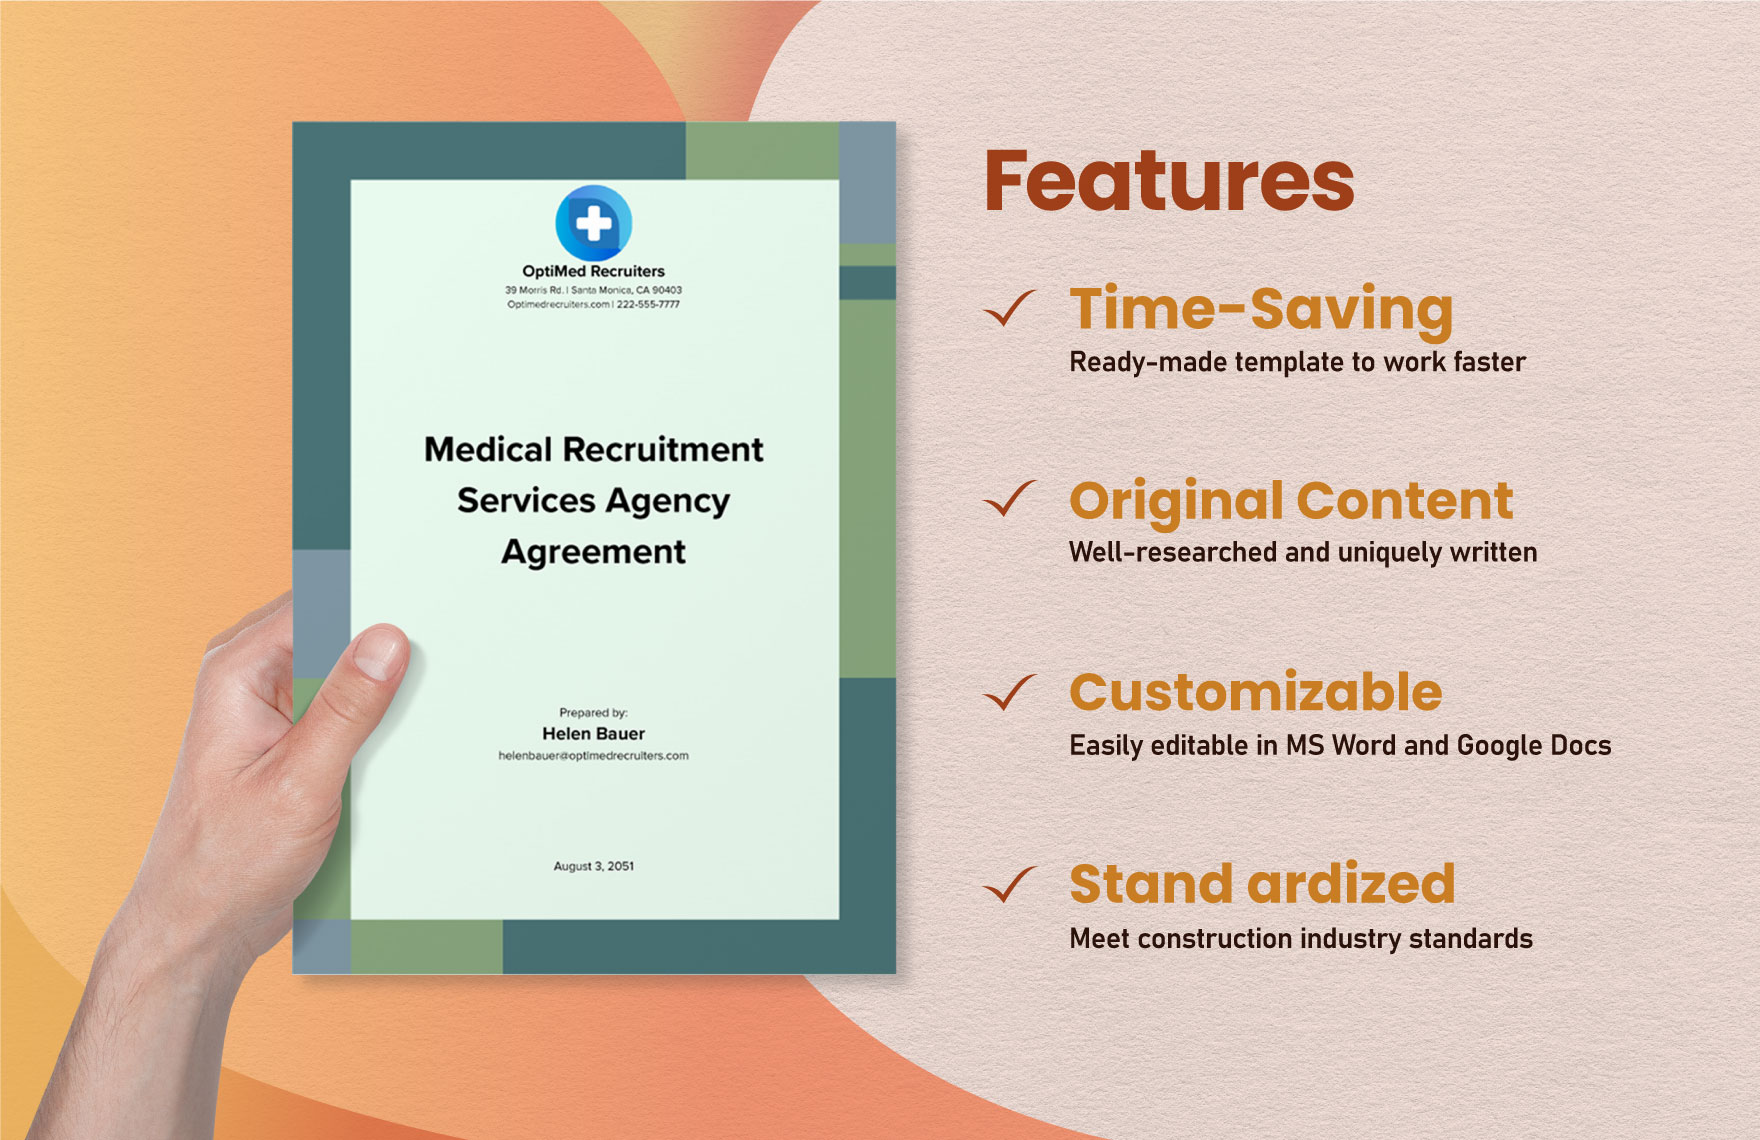 Medical Recruitment Services Agency Agreement